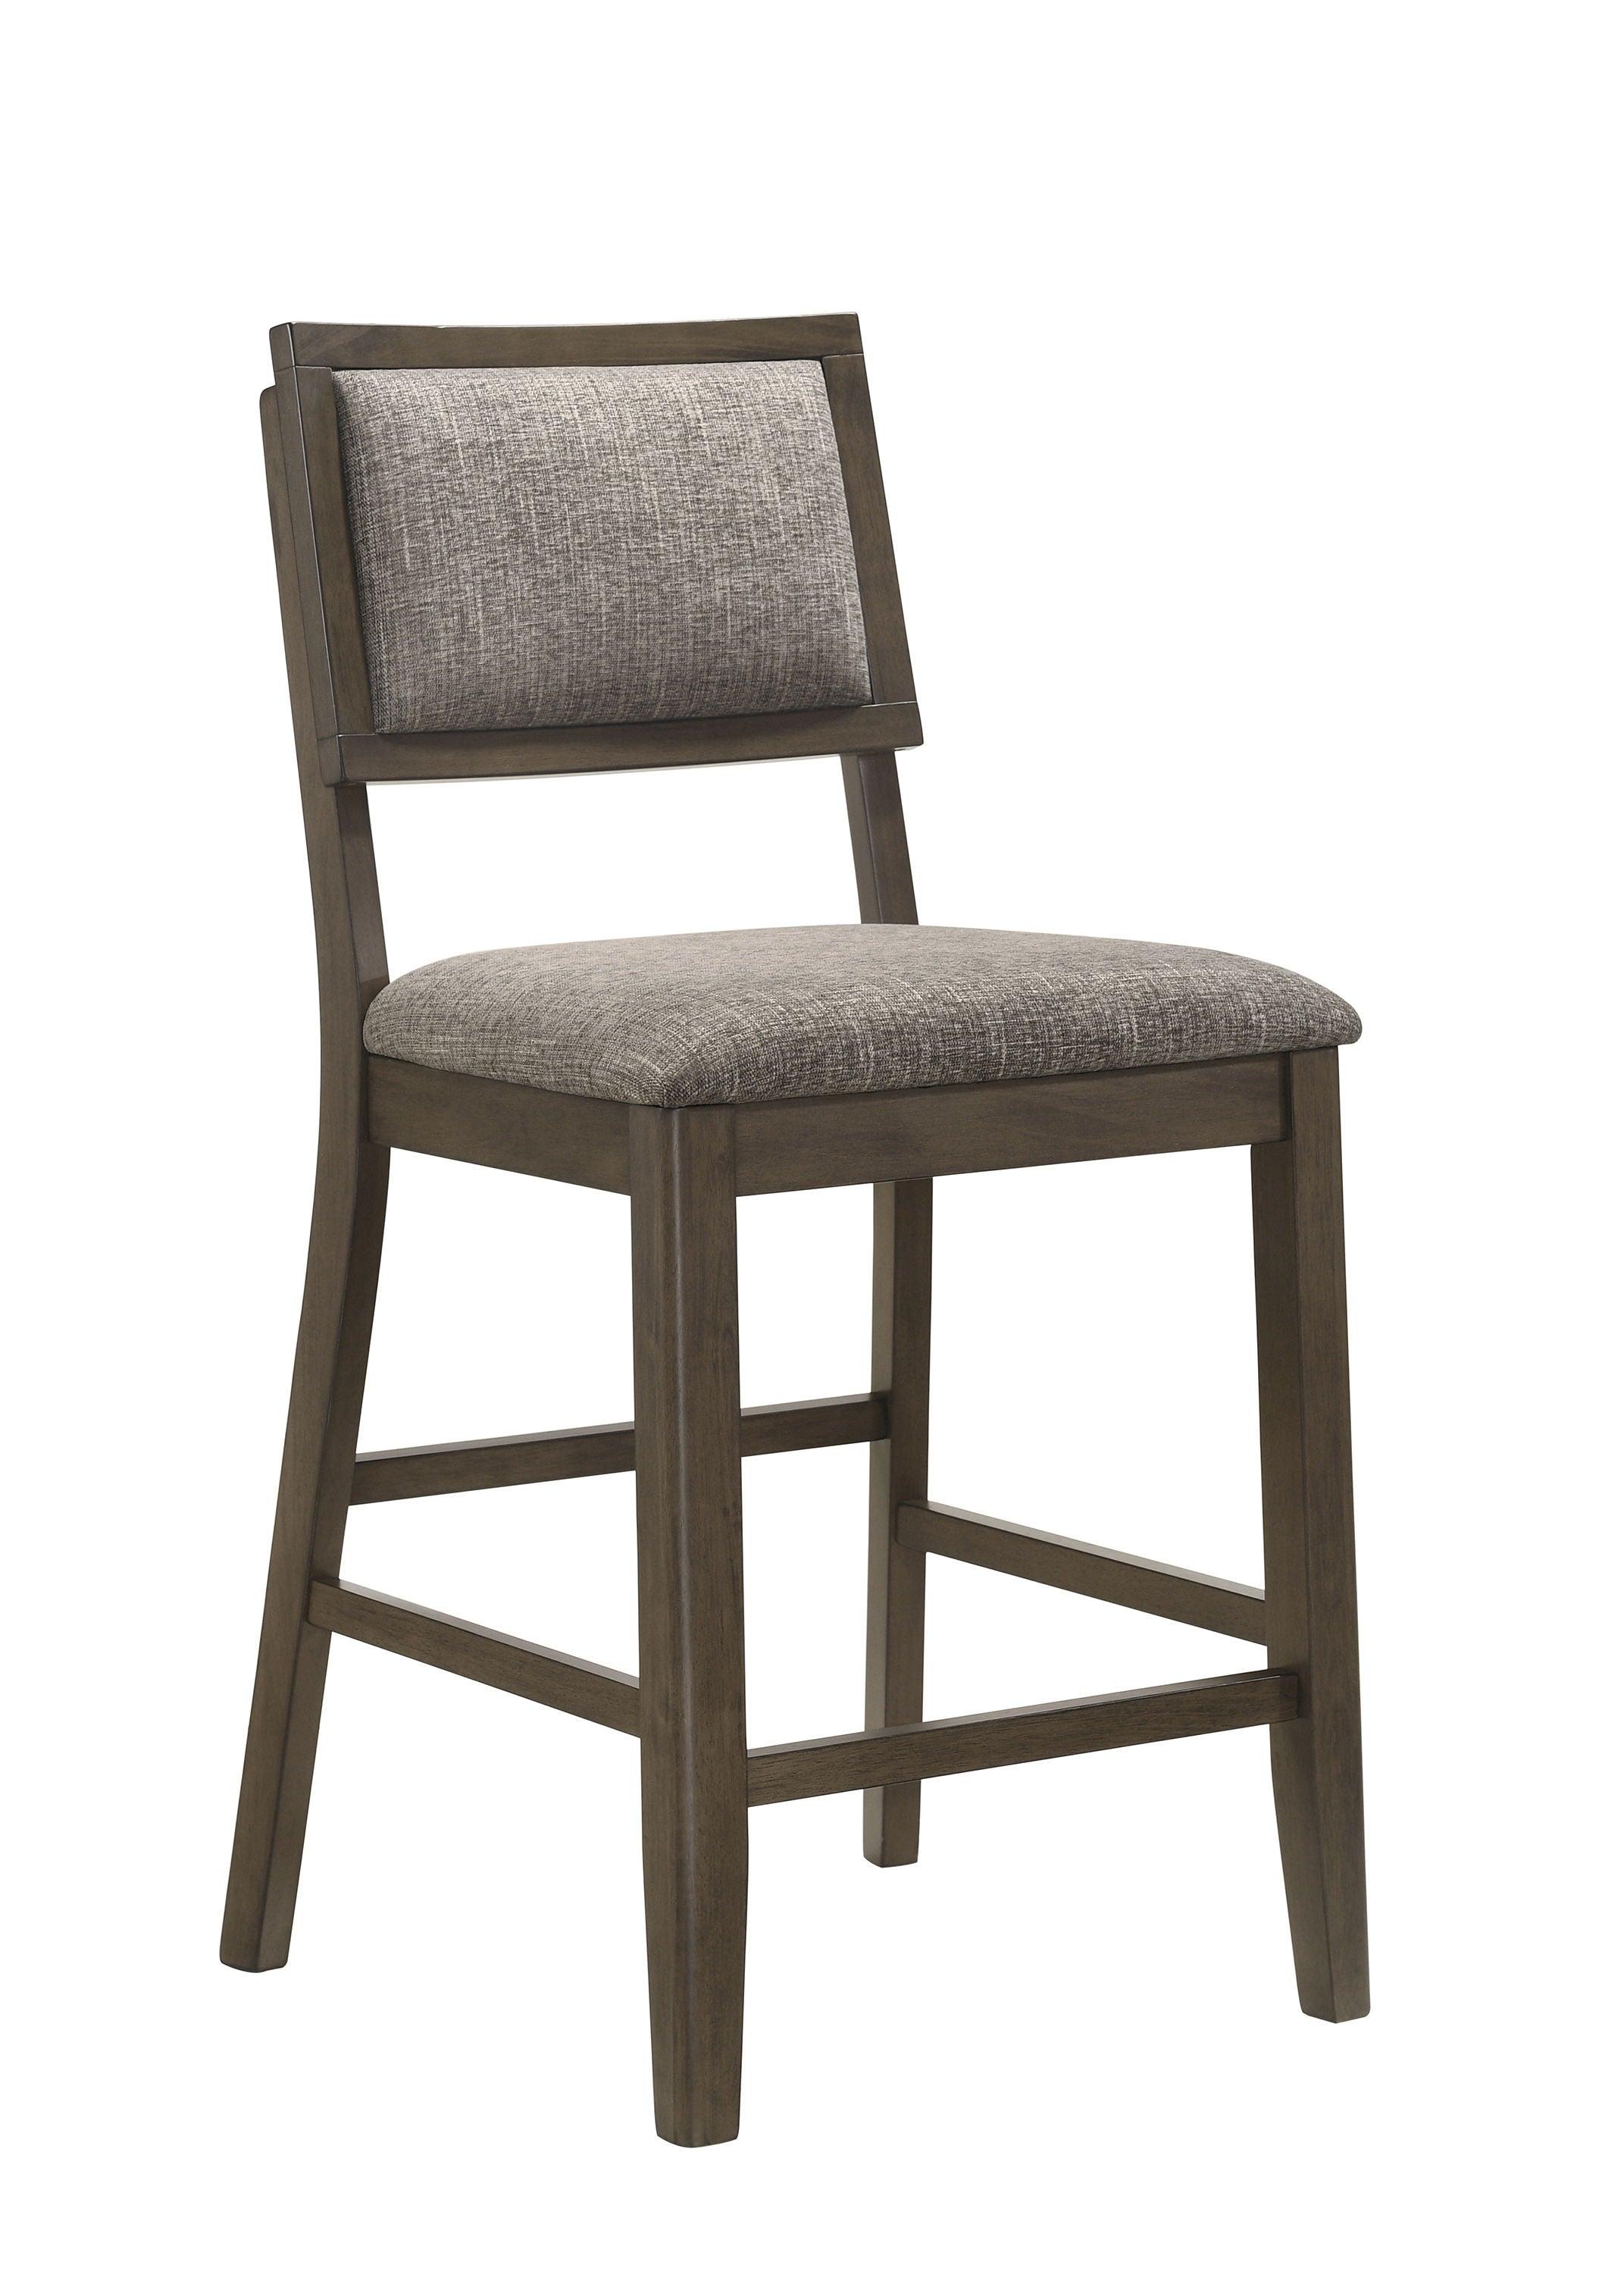 Crown Mark - Ember - Counter Height Chair (Set of 2) - Dark Gray - 5th Avenue Furniture